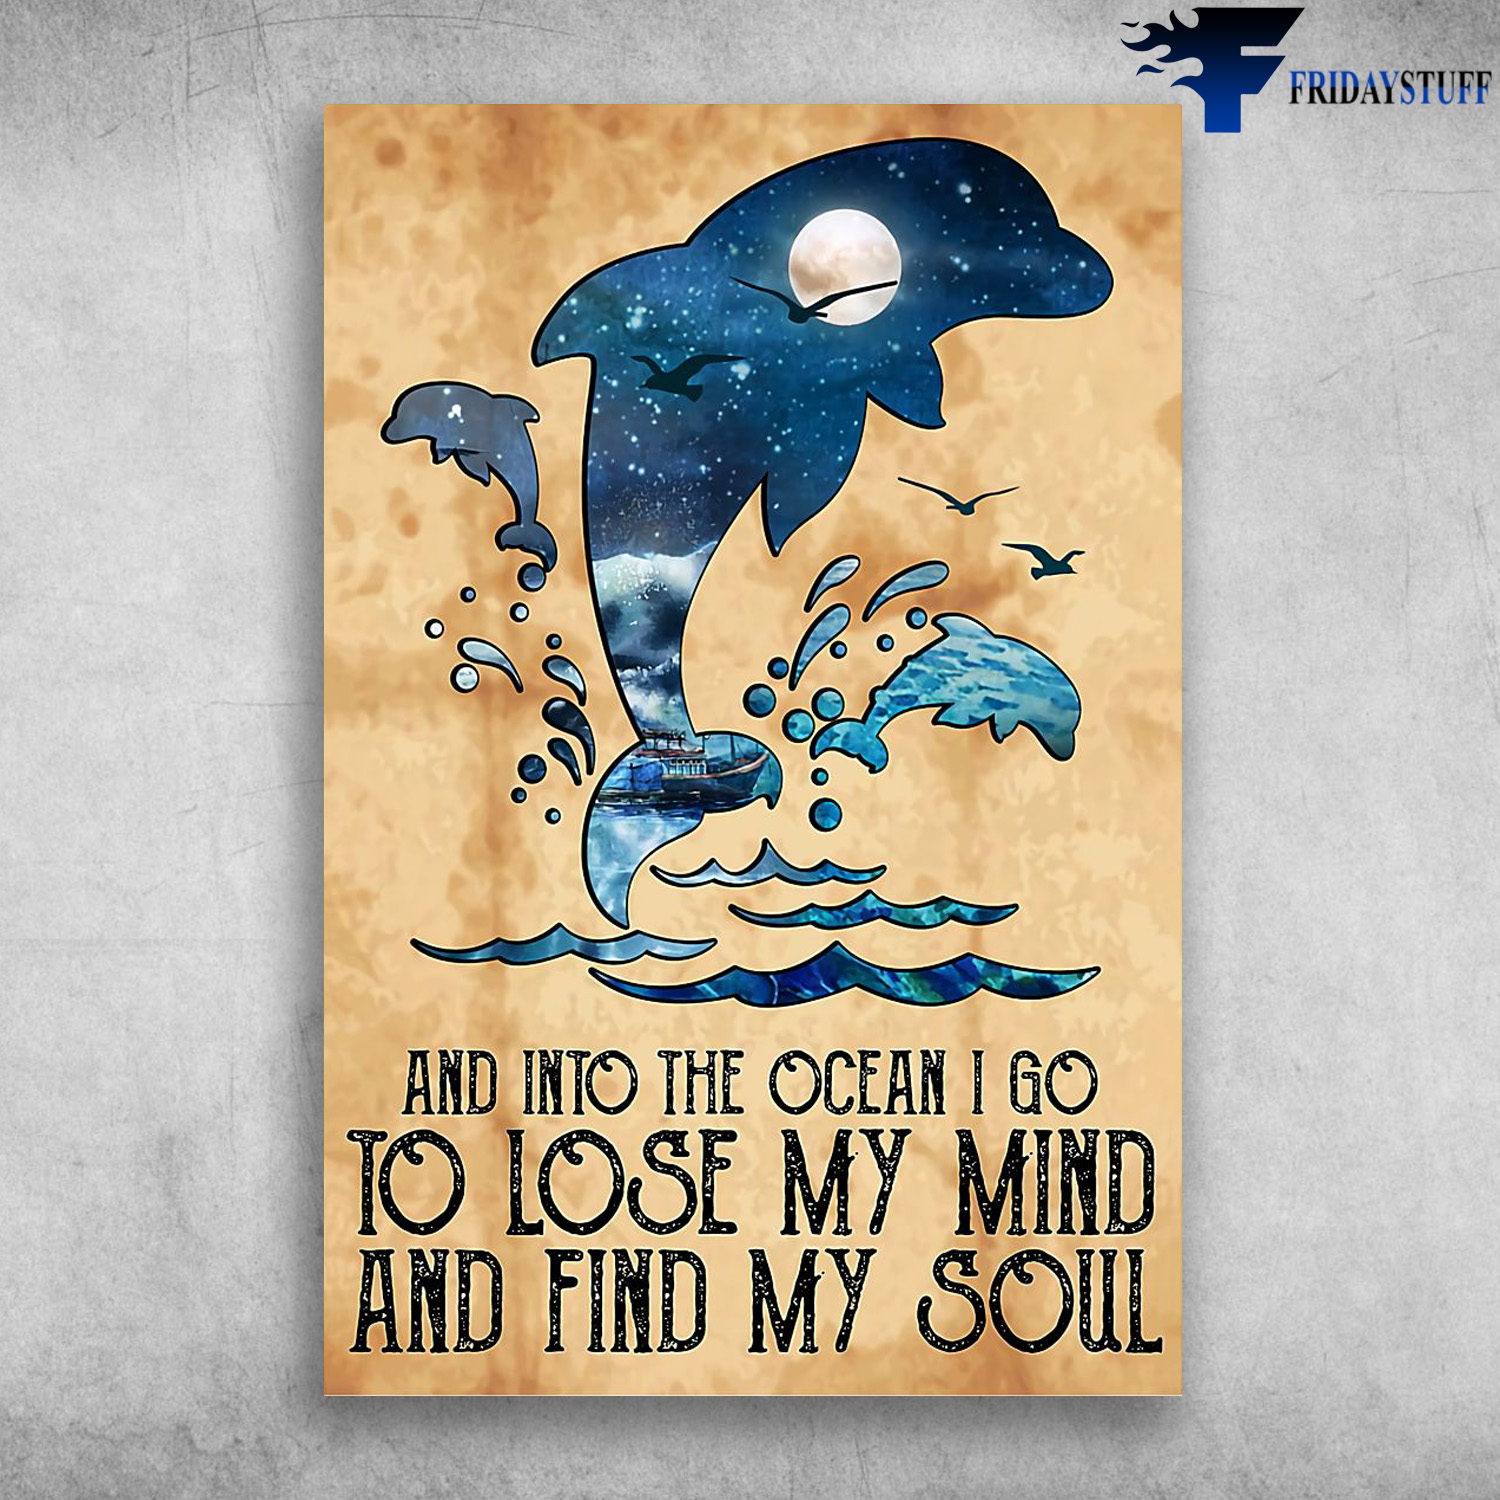 The Dolphins – And To The Ocean, I Go To Close My Mind And Find My Soul